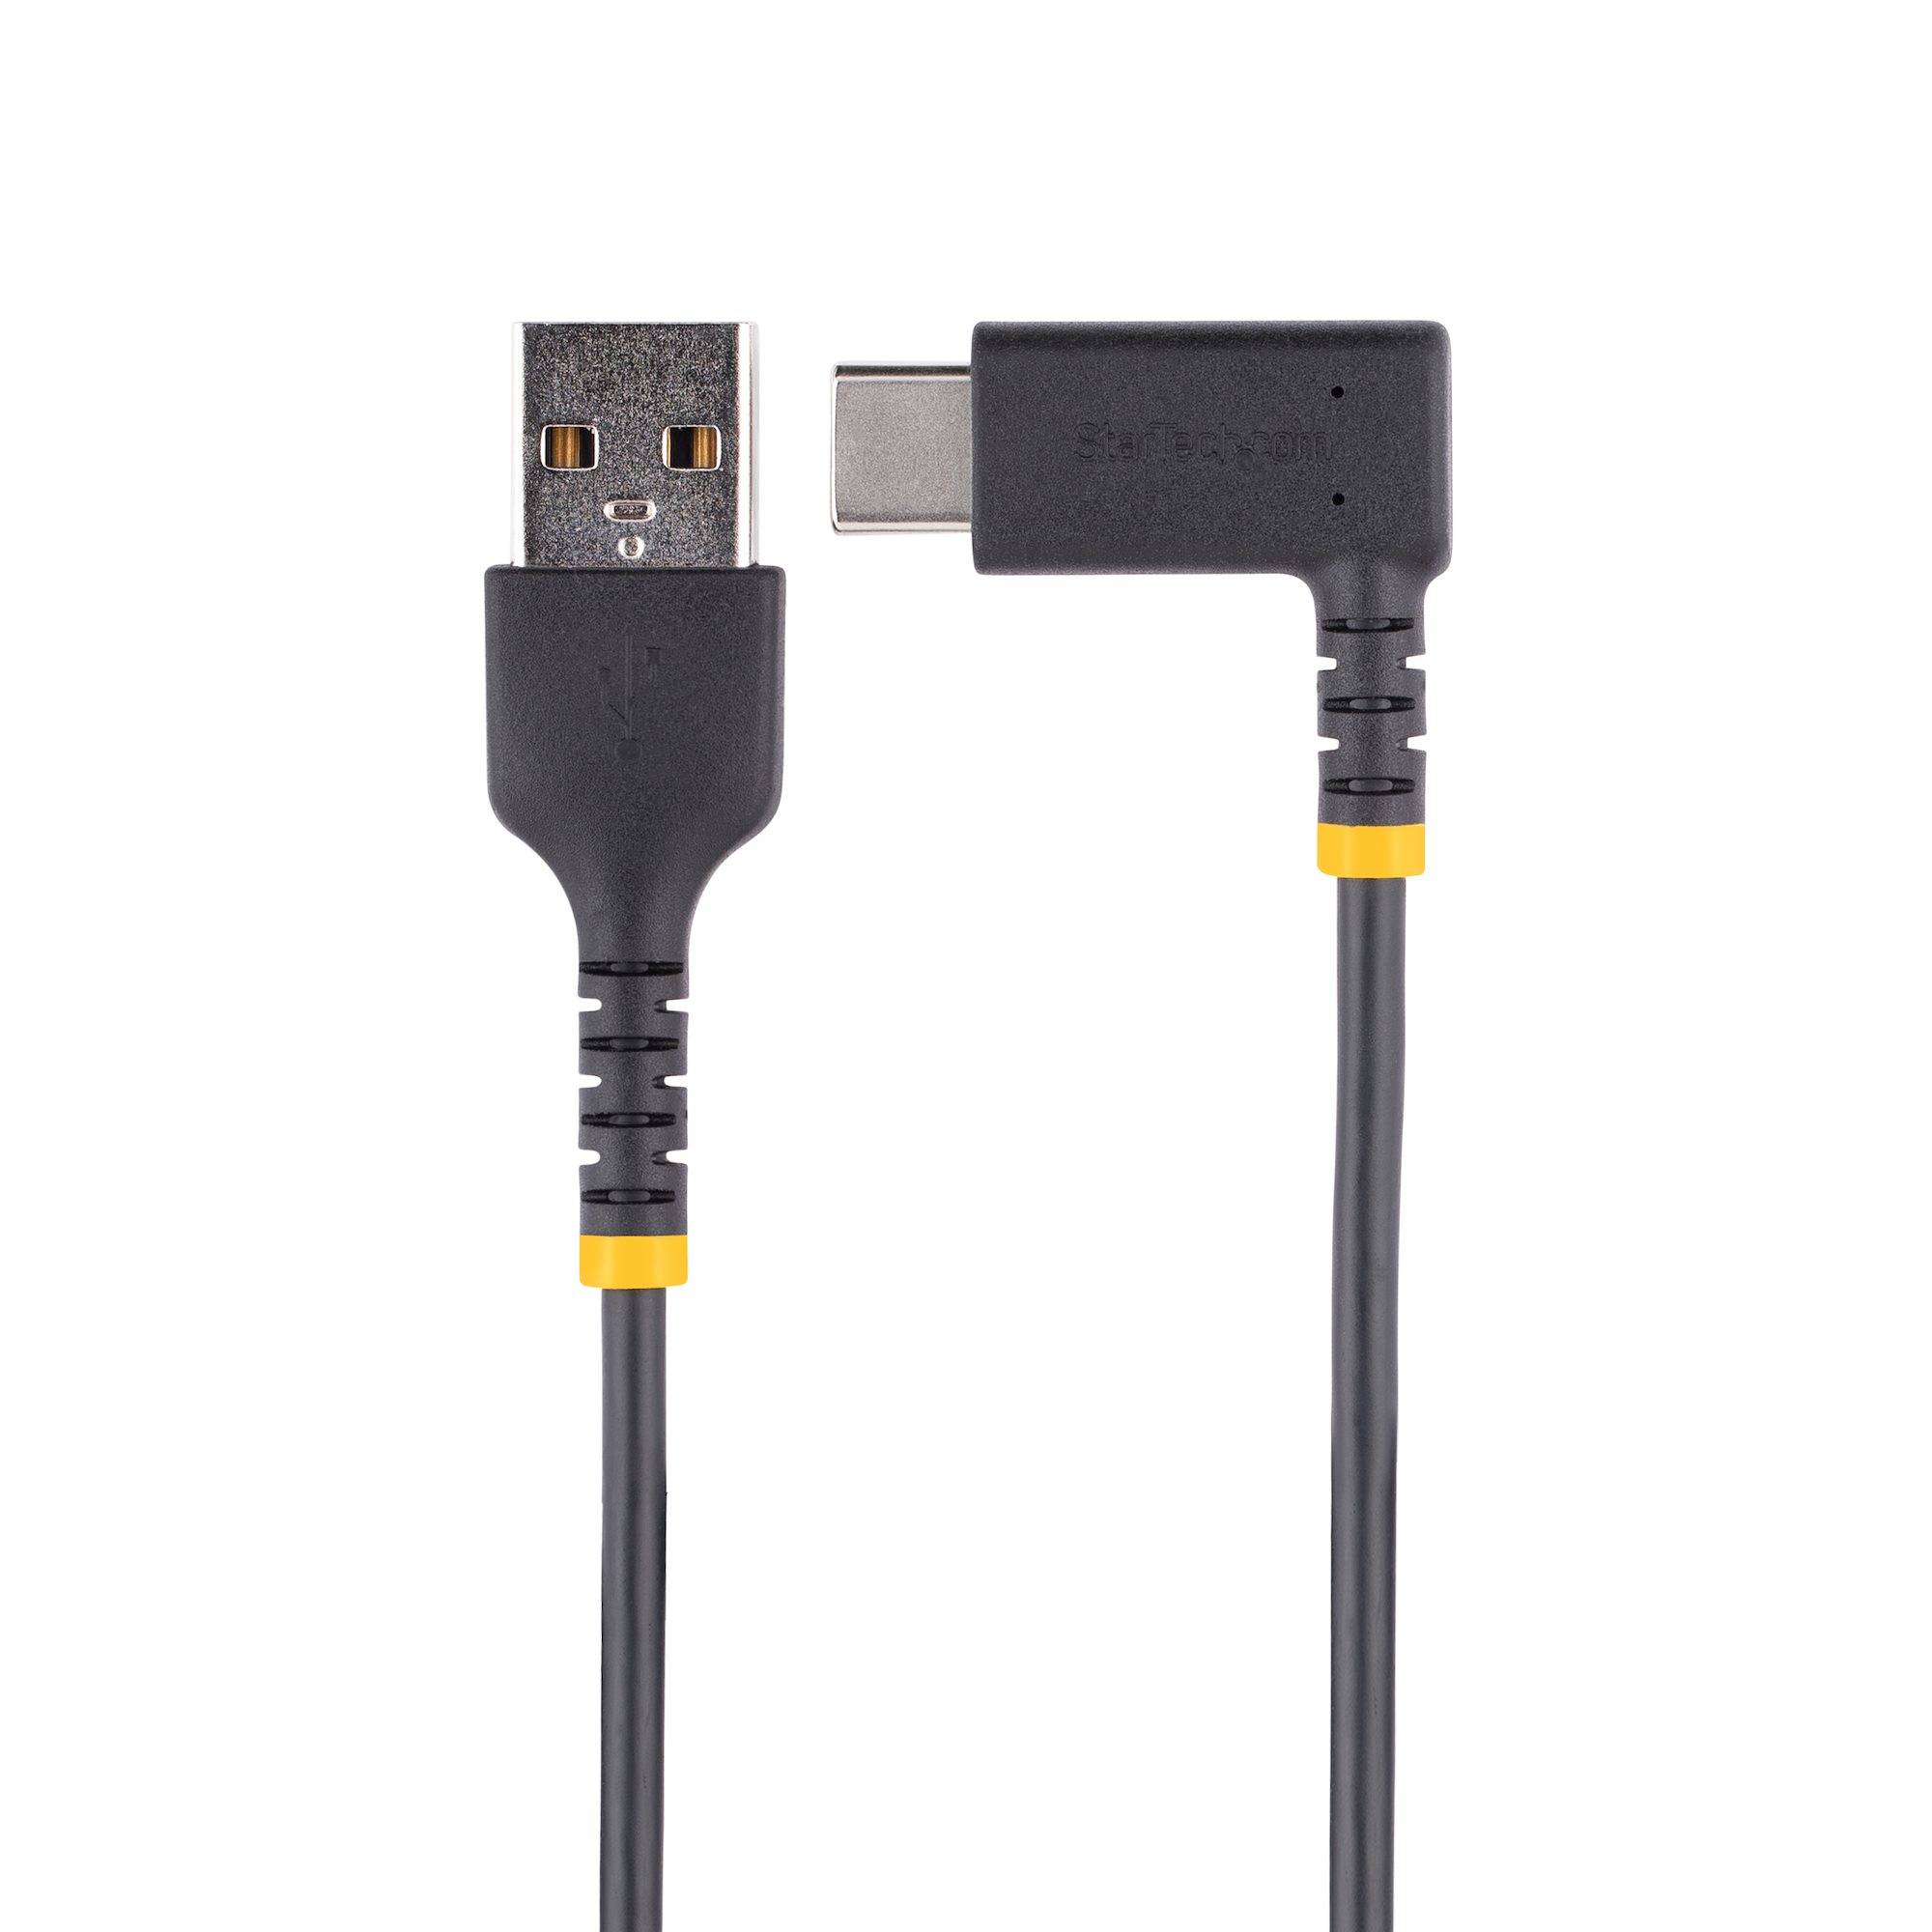 Rca Informatique - image du produit : USB-A TO USB-C CHARGING CABLE 15CM RIGHT ANGLE - FAST CHARGE